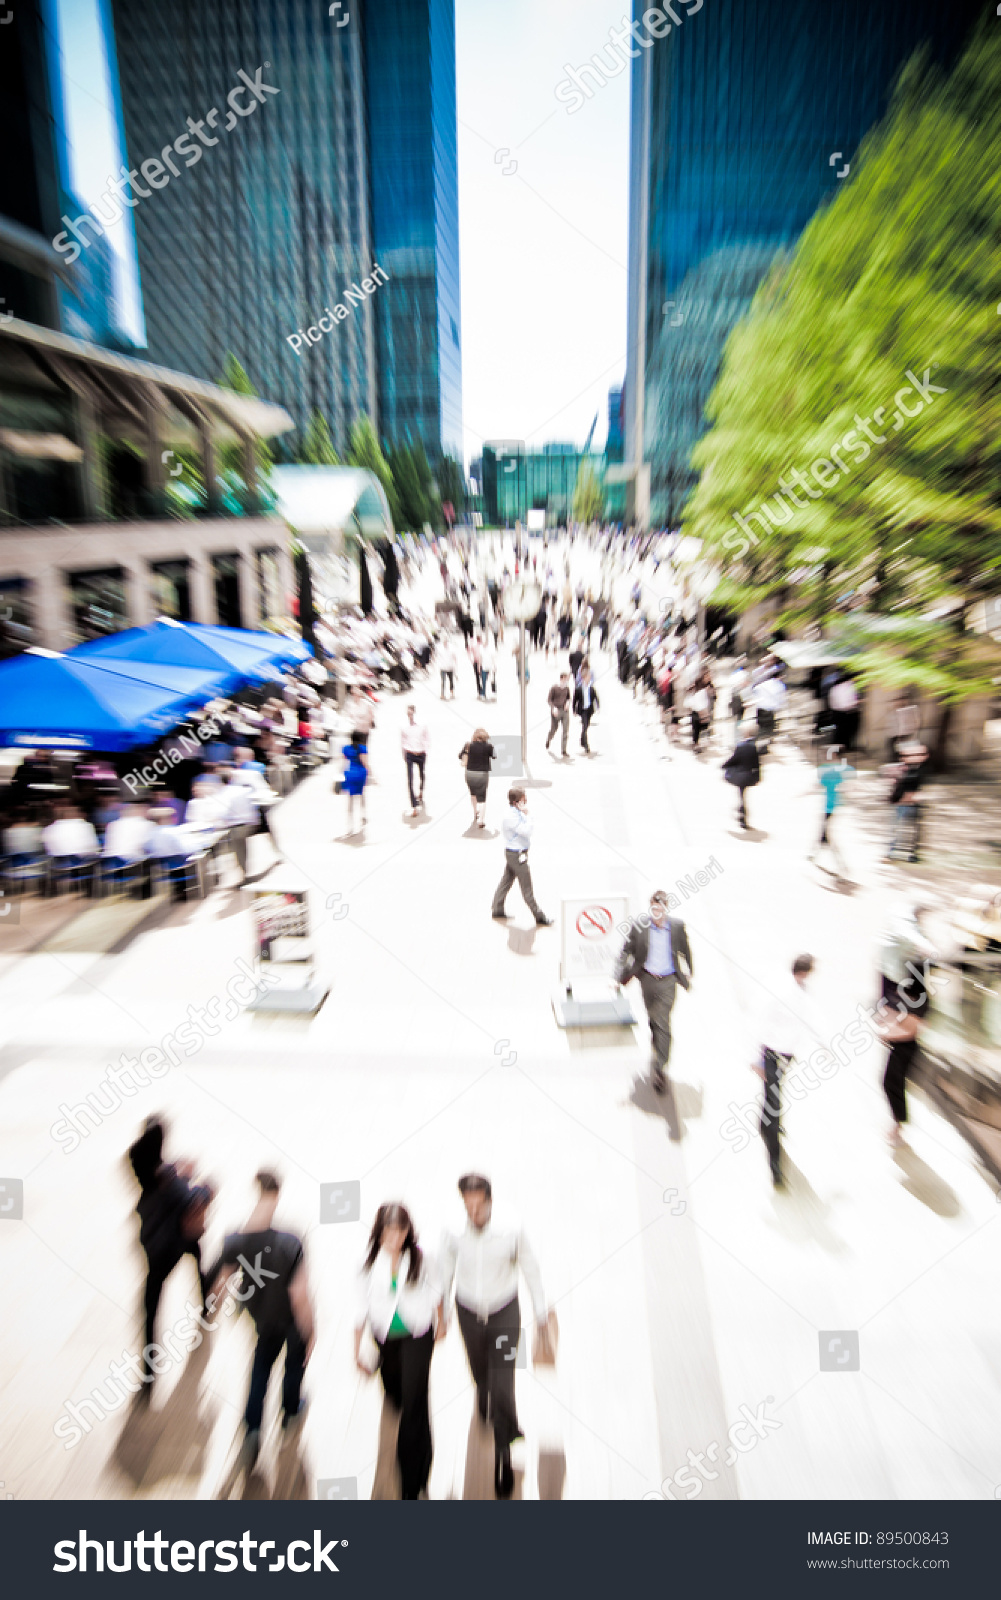 Zoom on business people rushing around at Canary Wharf, London. Motion blur. #89500843